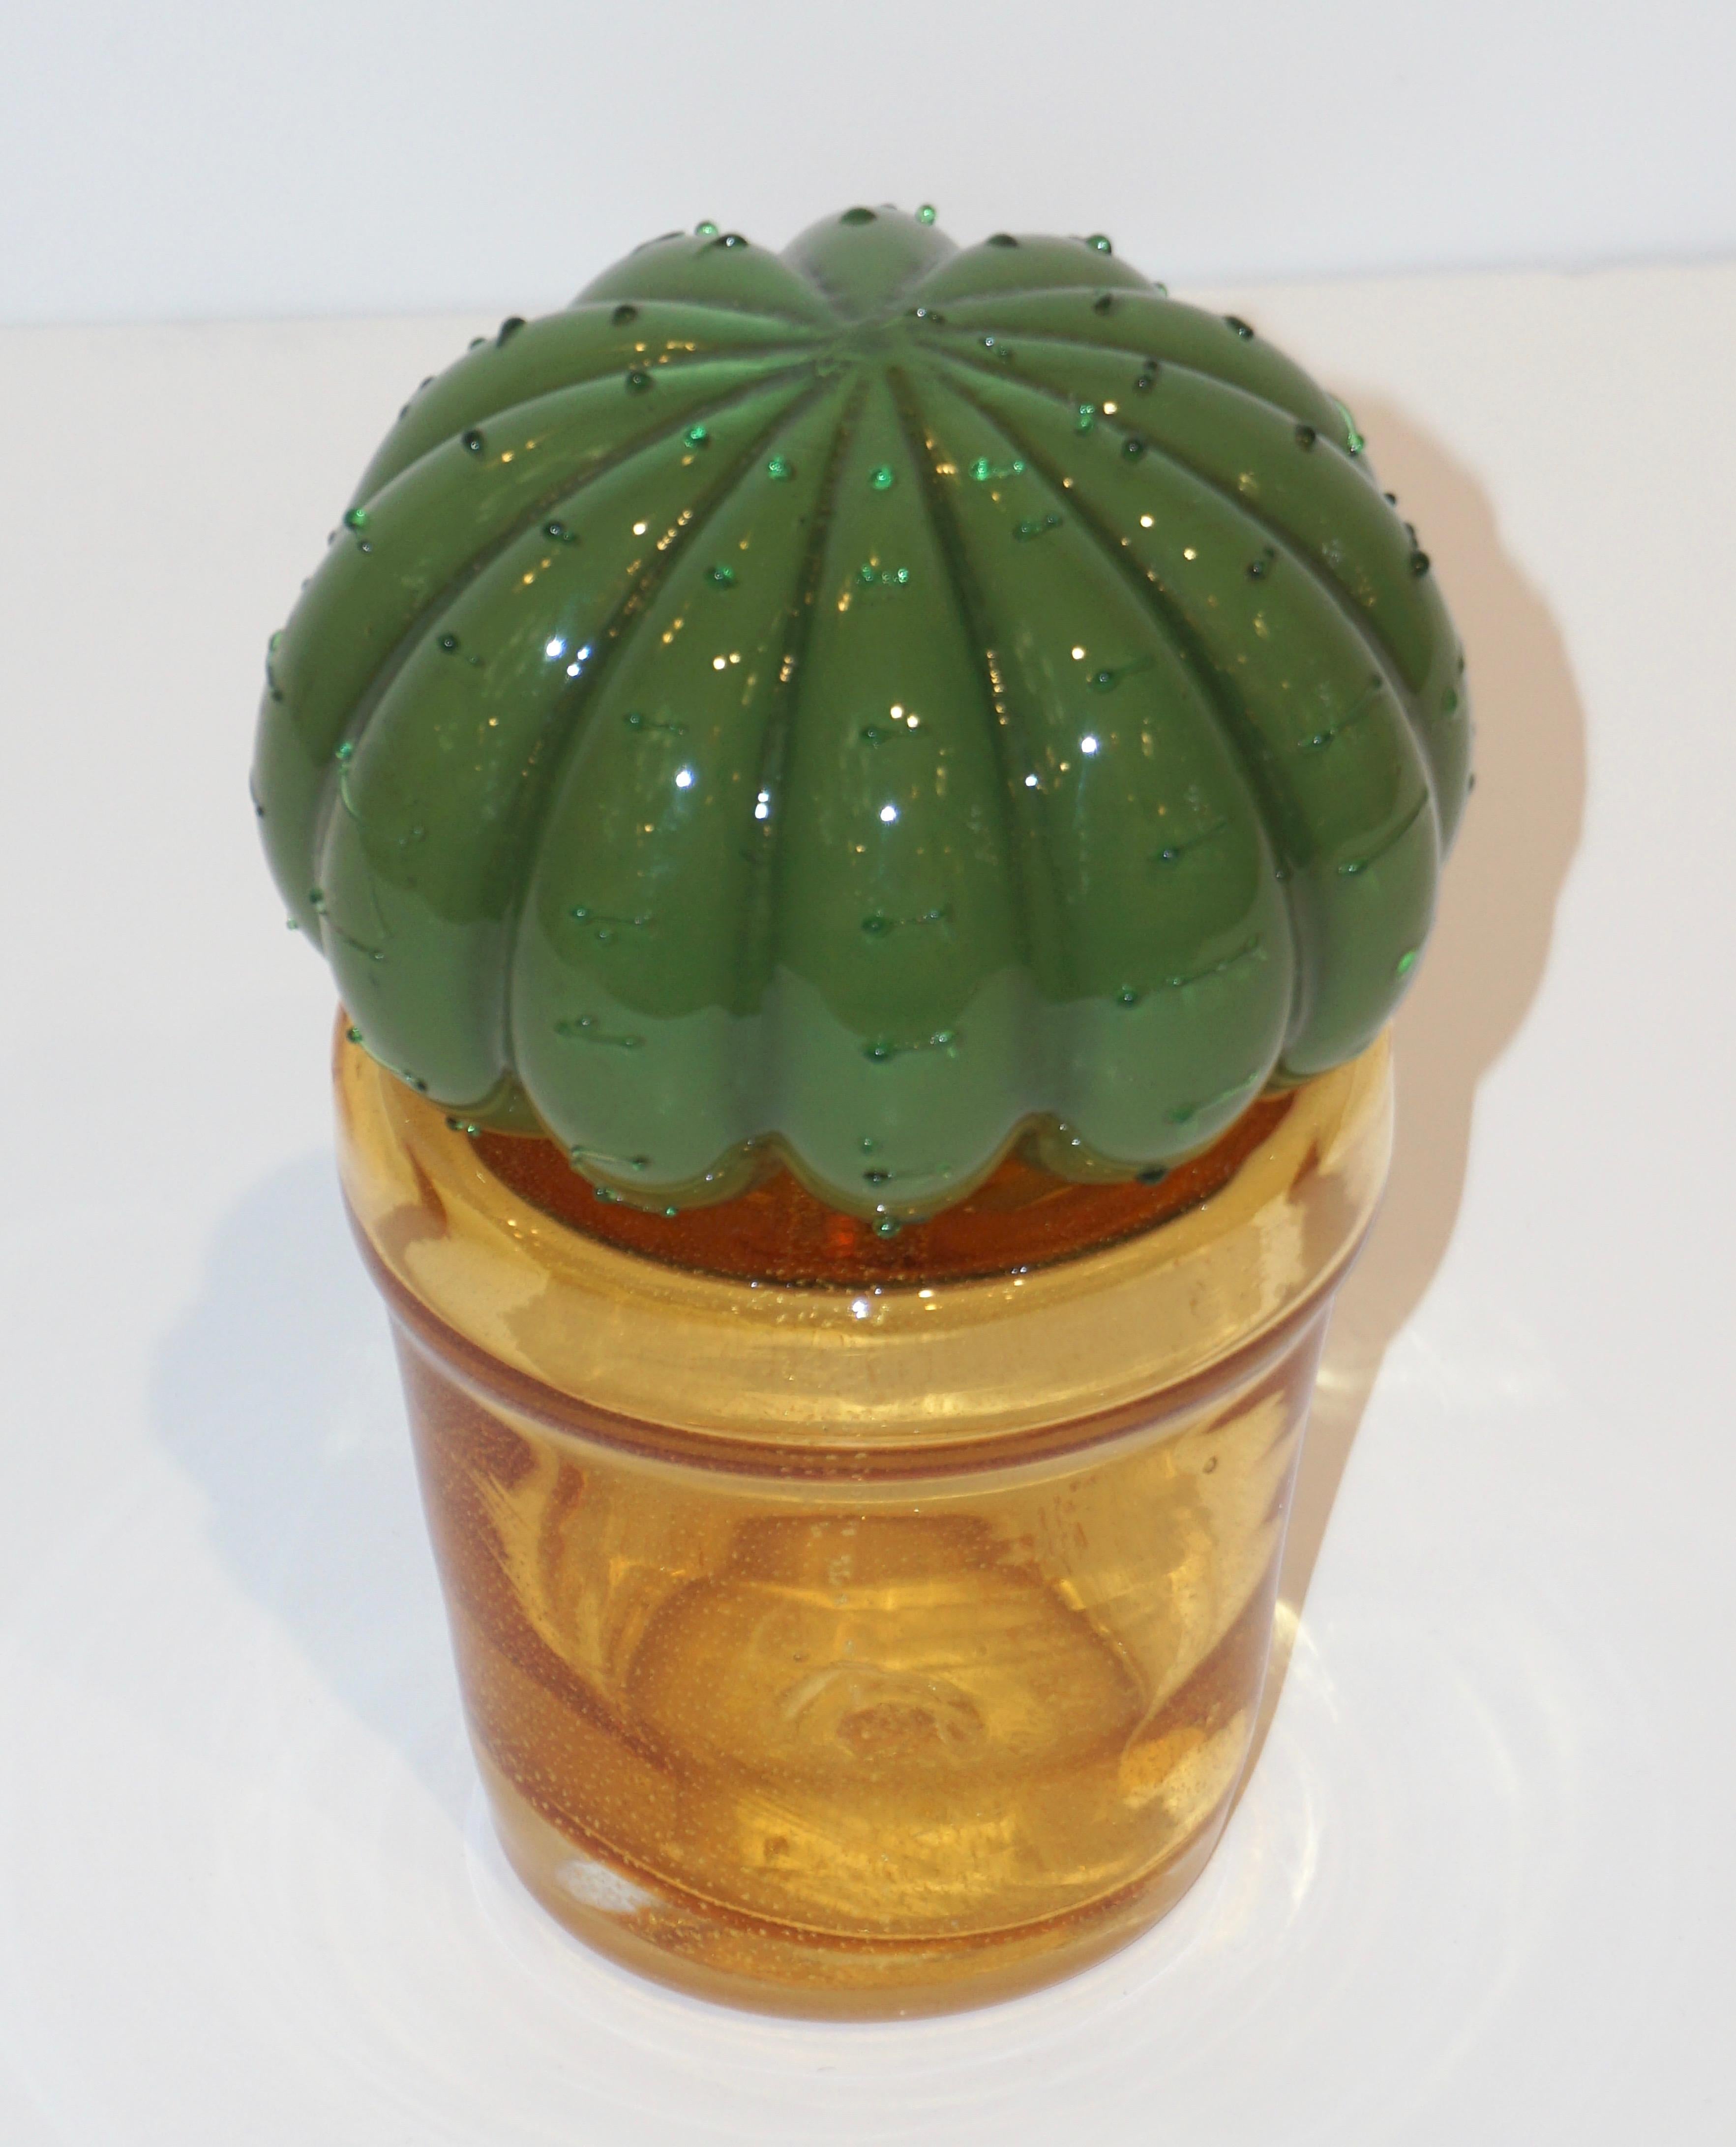 1990 Italian highly collectible cactus of limited edition, entirely hand crafted in Murano, with modern minimalist design blown by Formia, in a lifelike organic shape in overlaid verdant jade green Murano glass highlighted with emerald prickles in